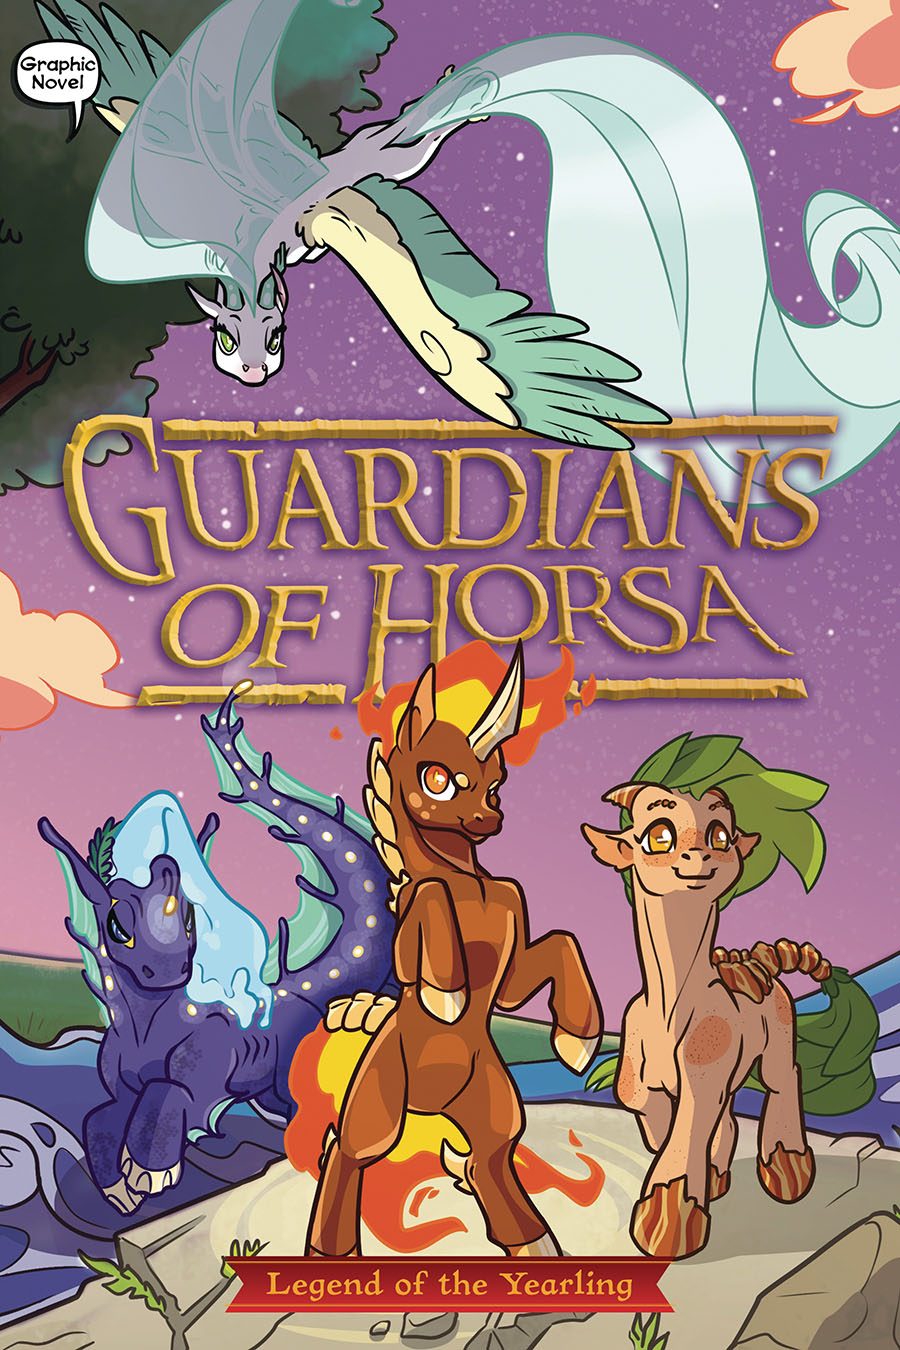 Guardians Of Horsa Vol 1 Legend Of The Yearling TP